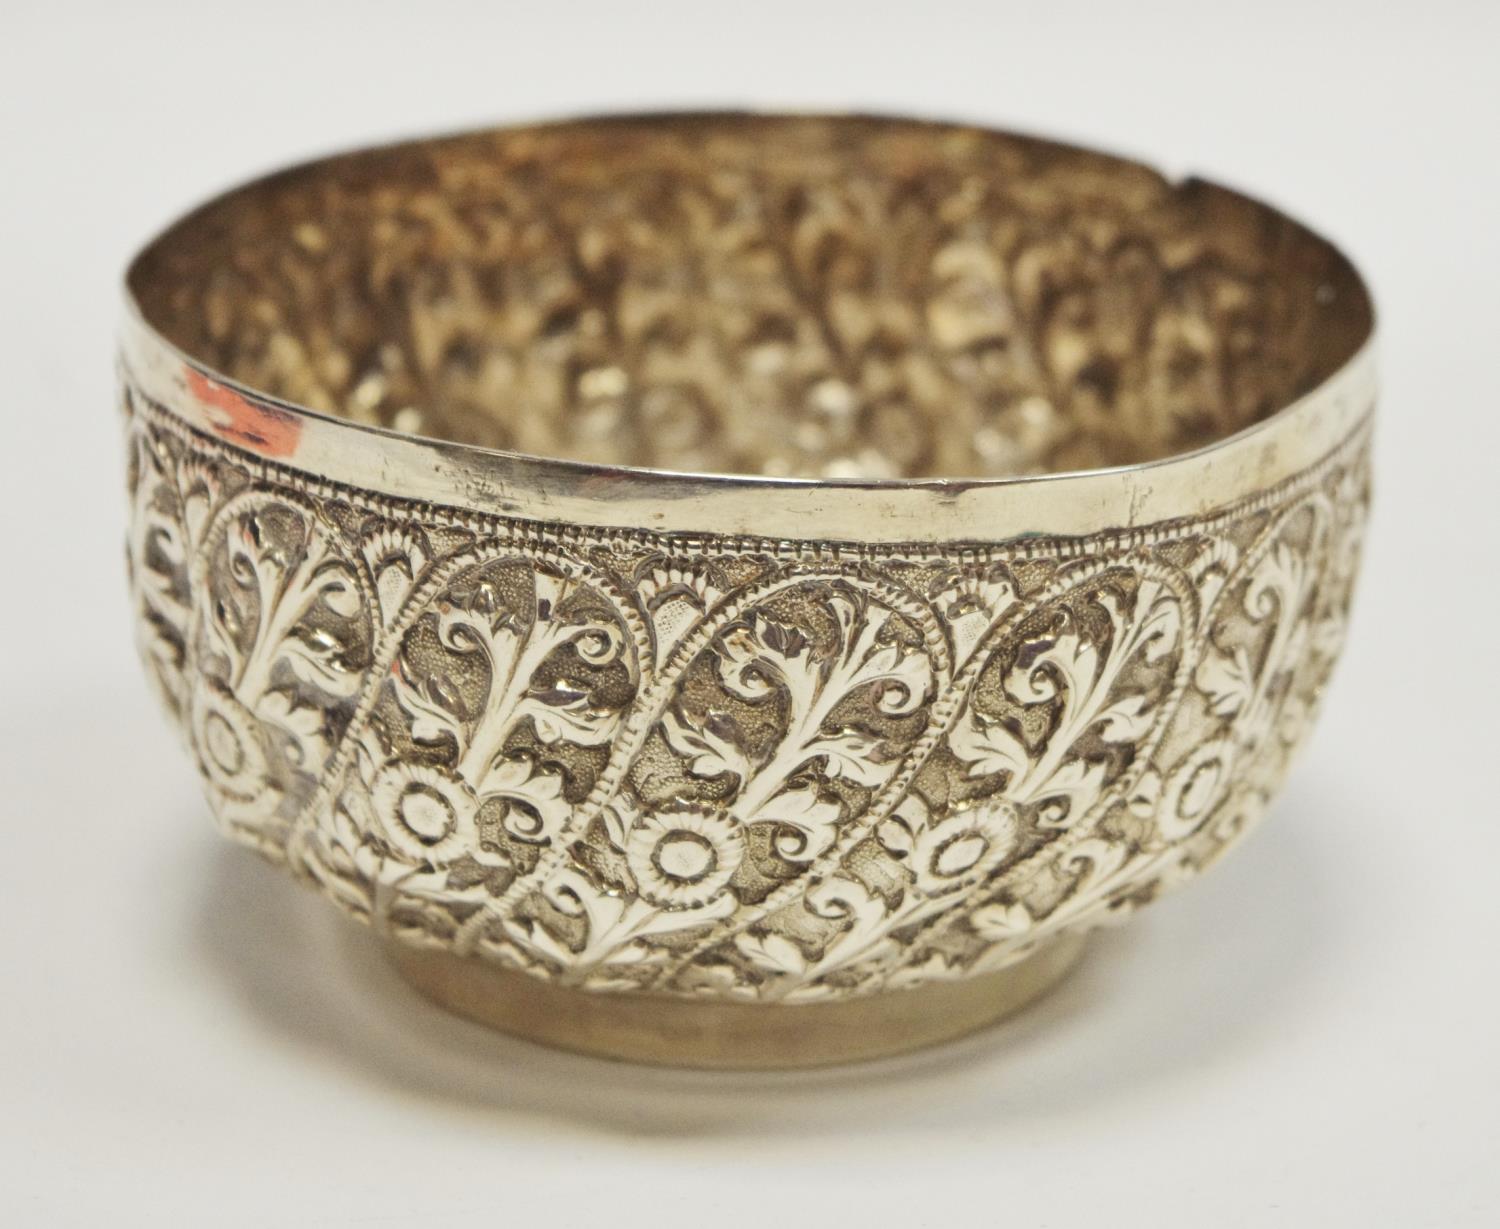 A white metal Indian bowl repoussé decoration of foliate scrolled panels 79g gross